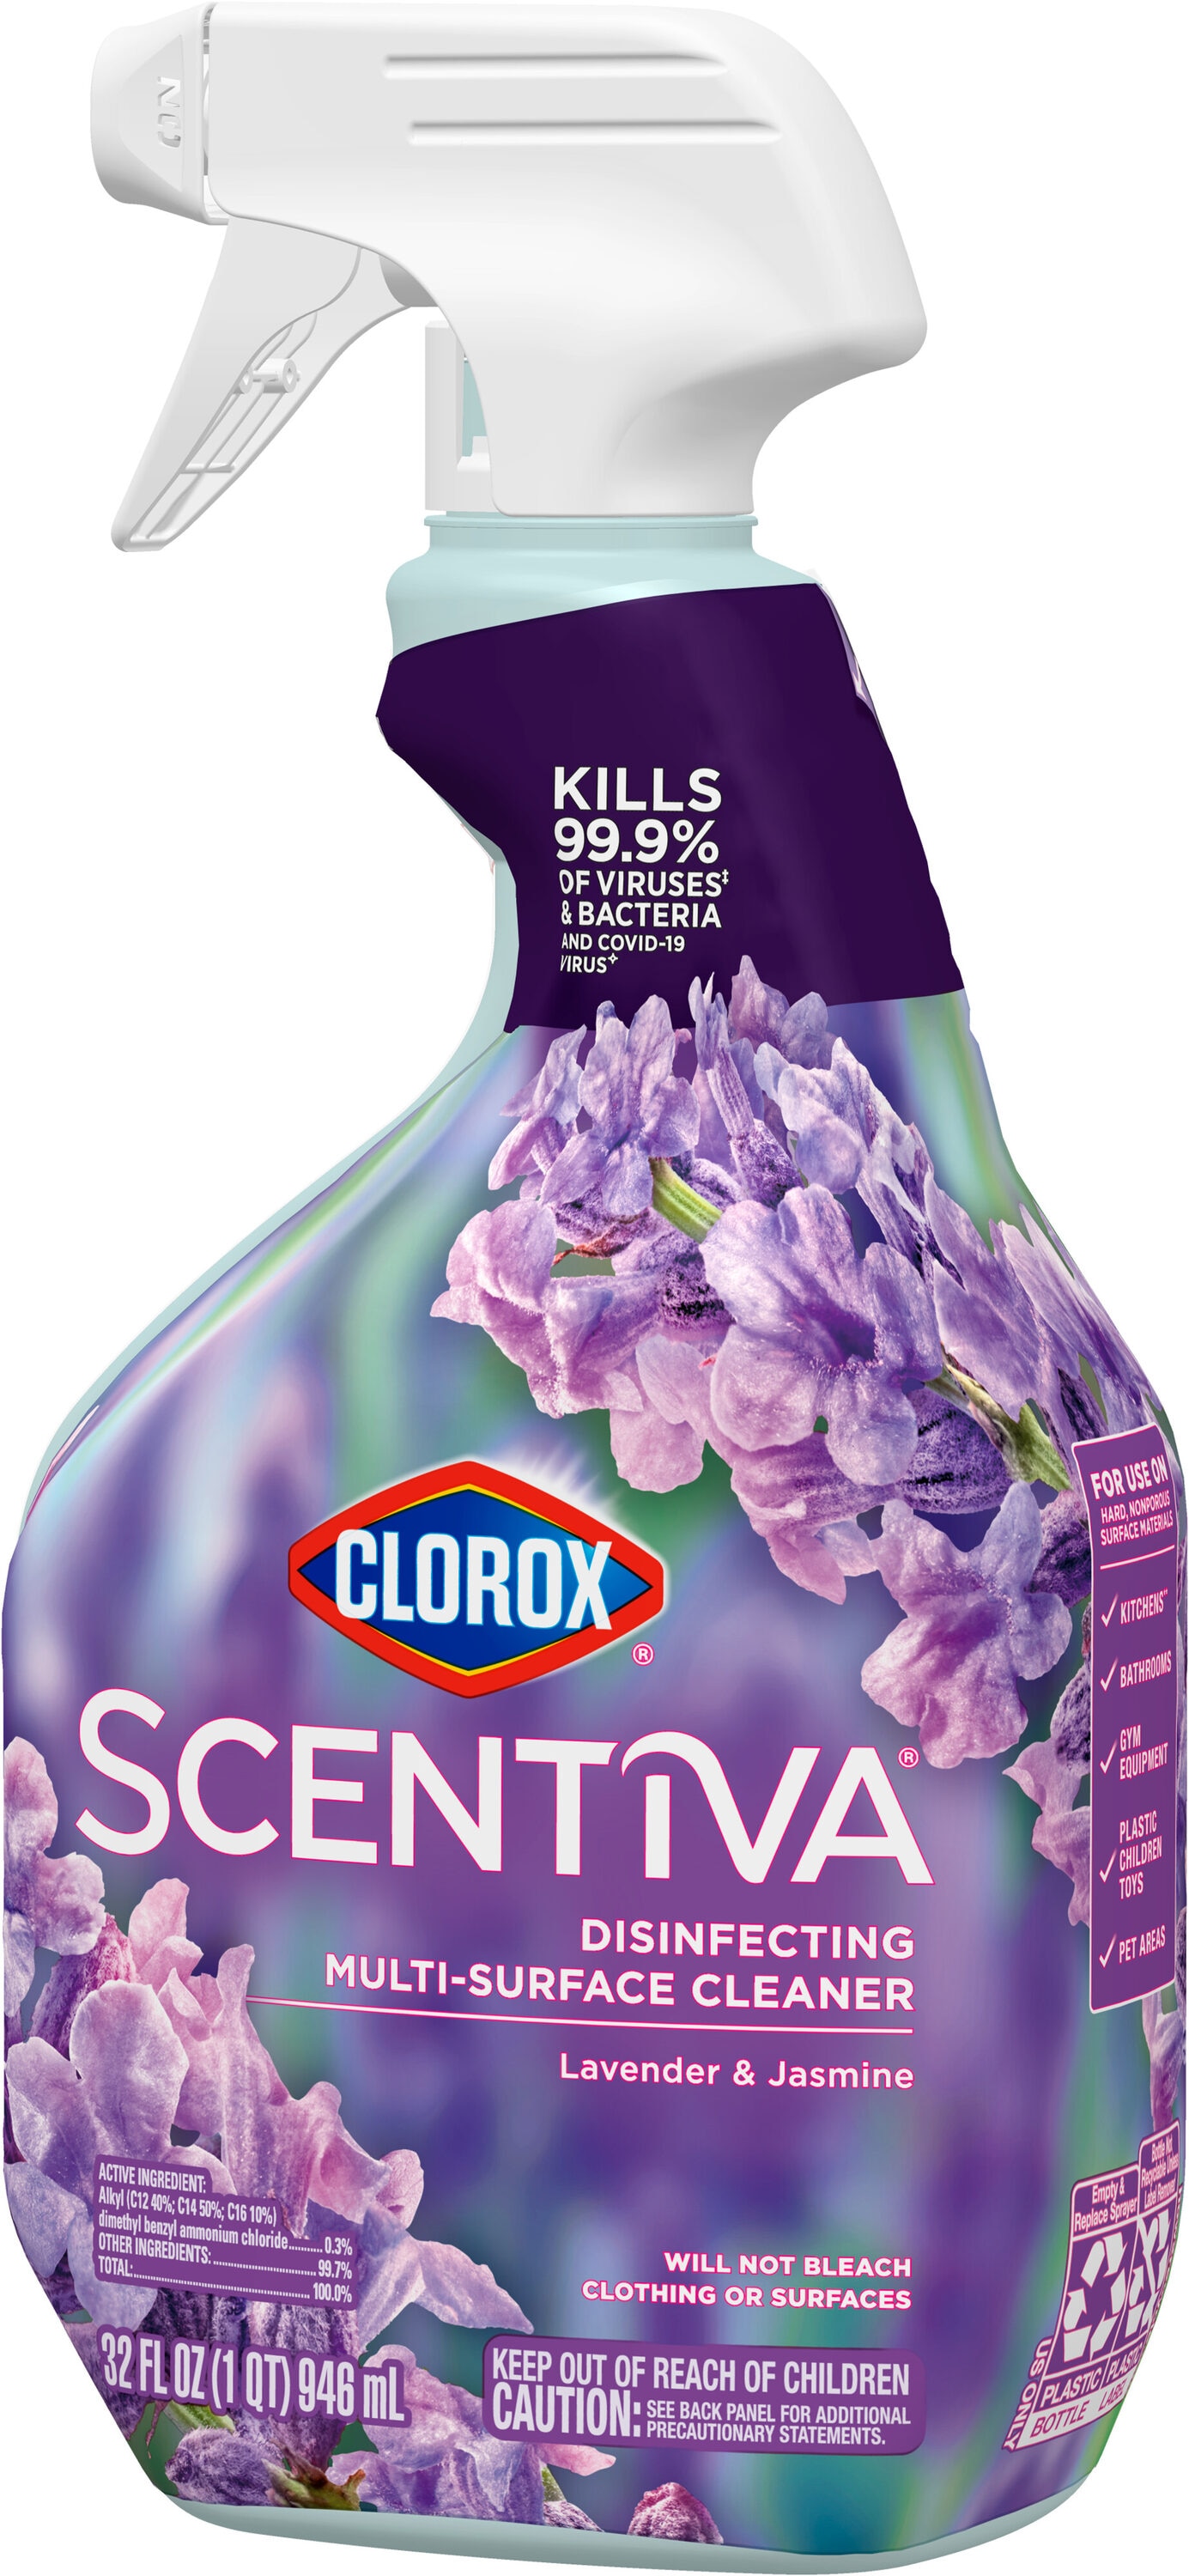 Shop Clorox Tuscan Lavender & Jasmine Household Cleaning Supplies